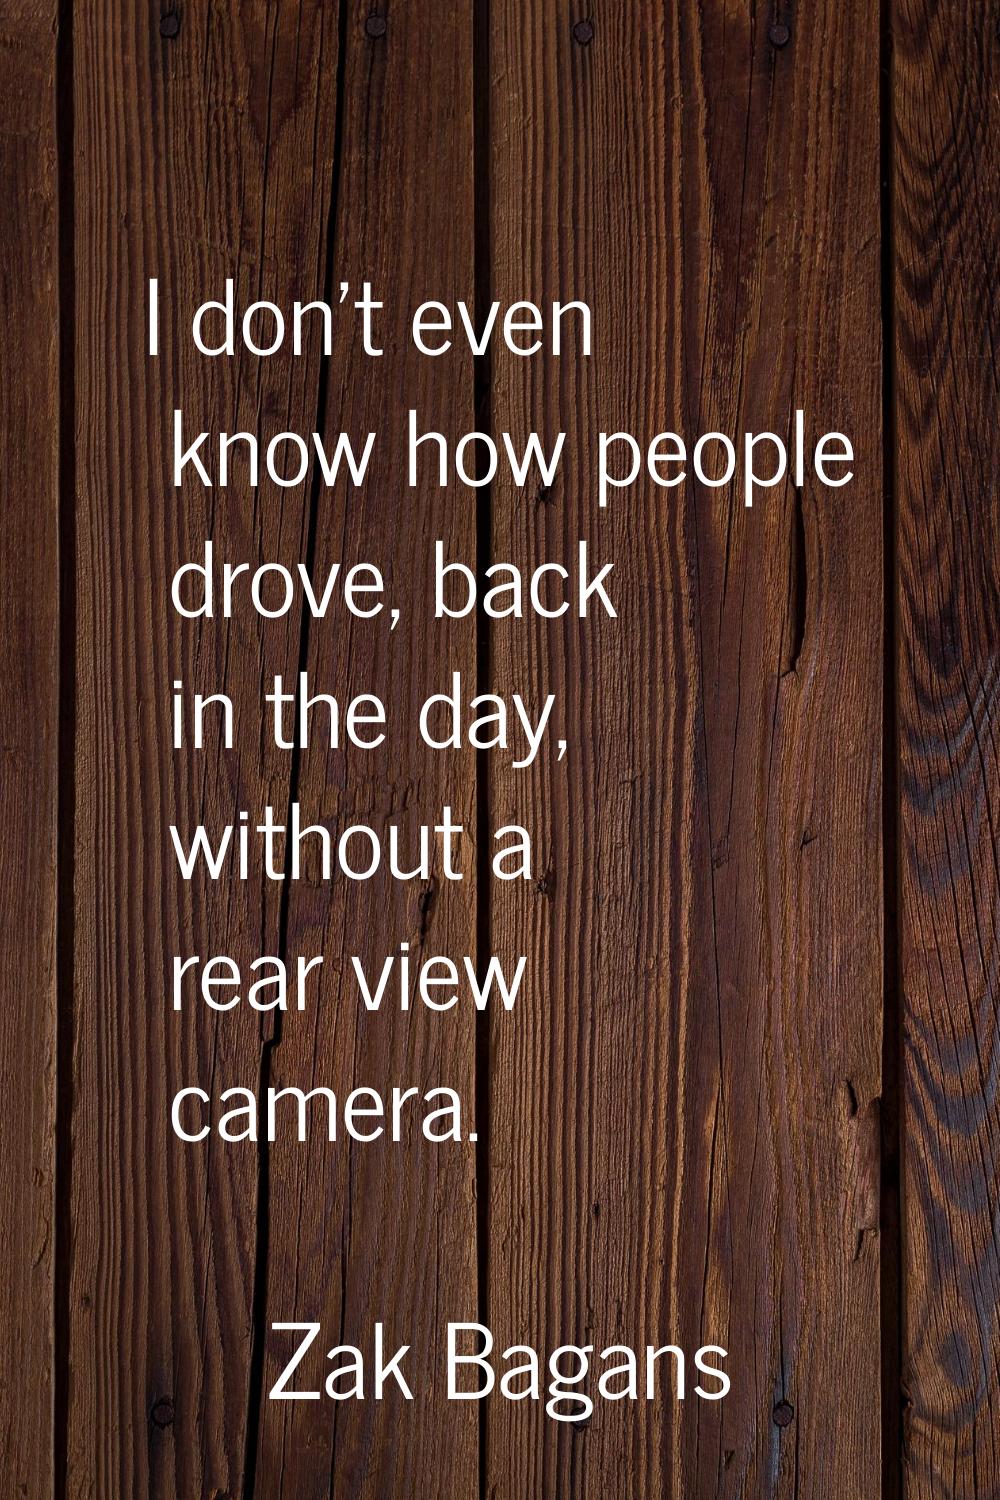 I don't even know how people drove, back in the day, without a rear view camera.